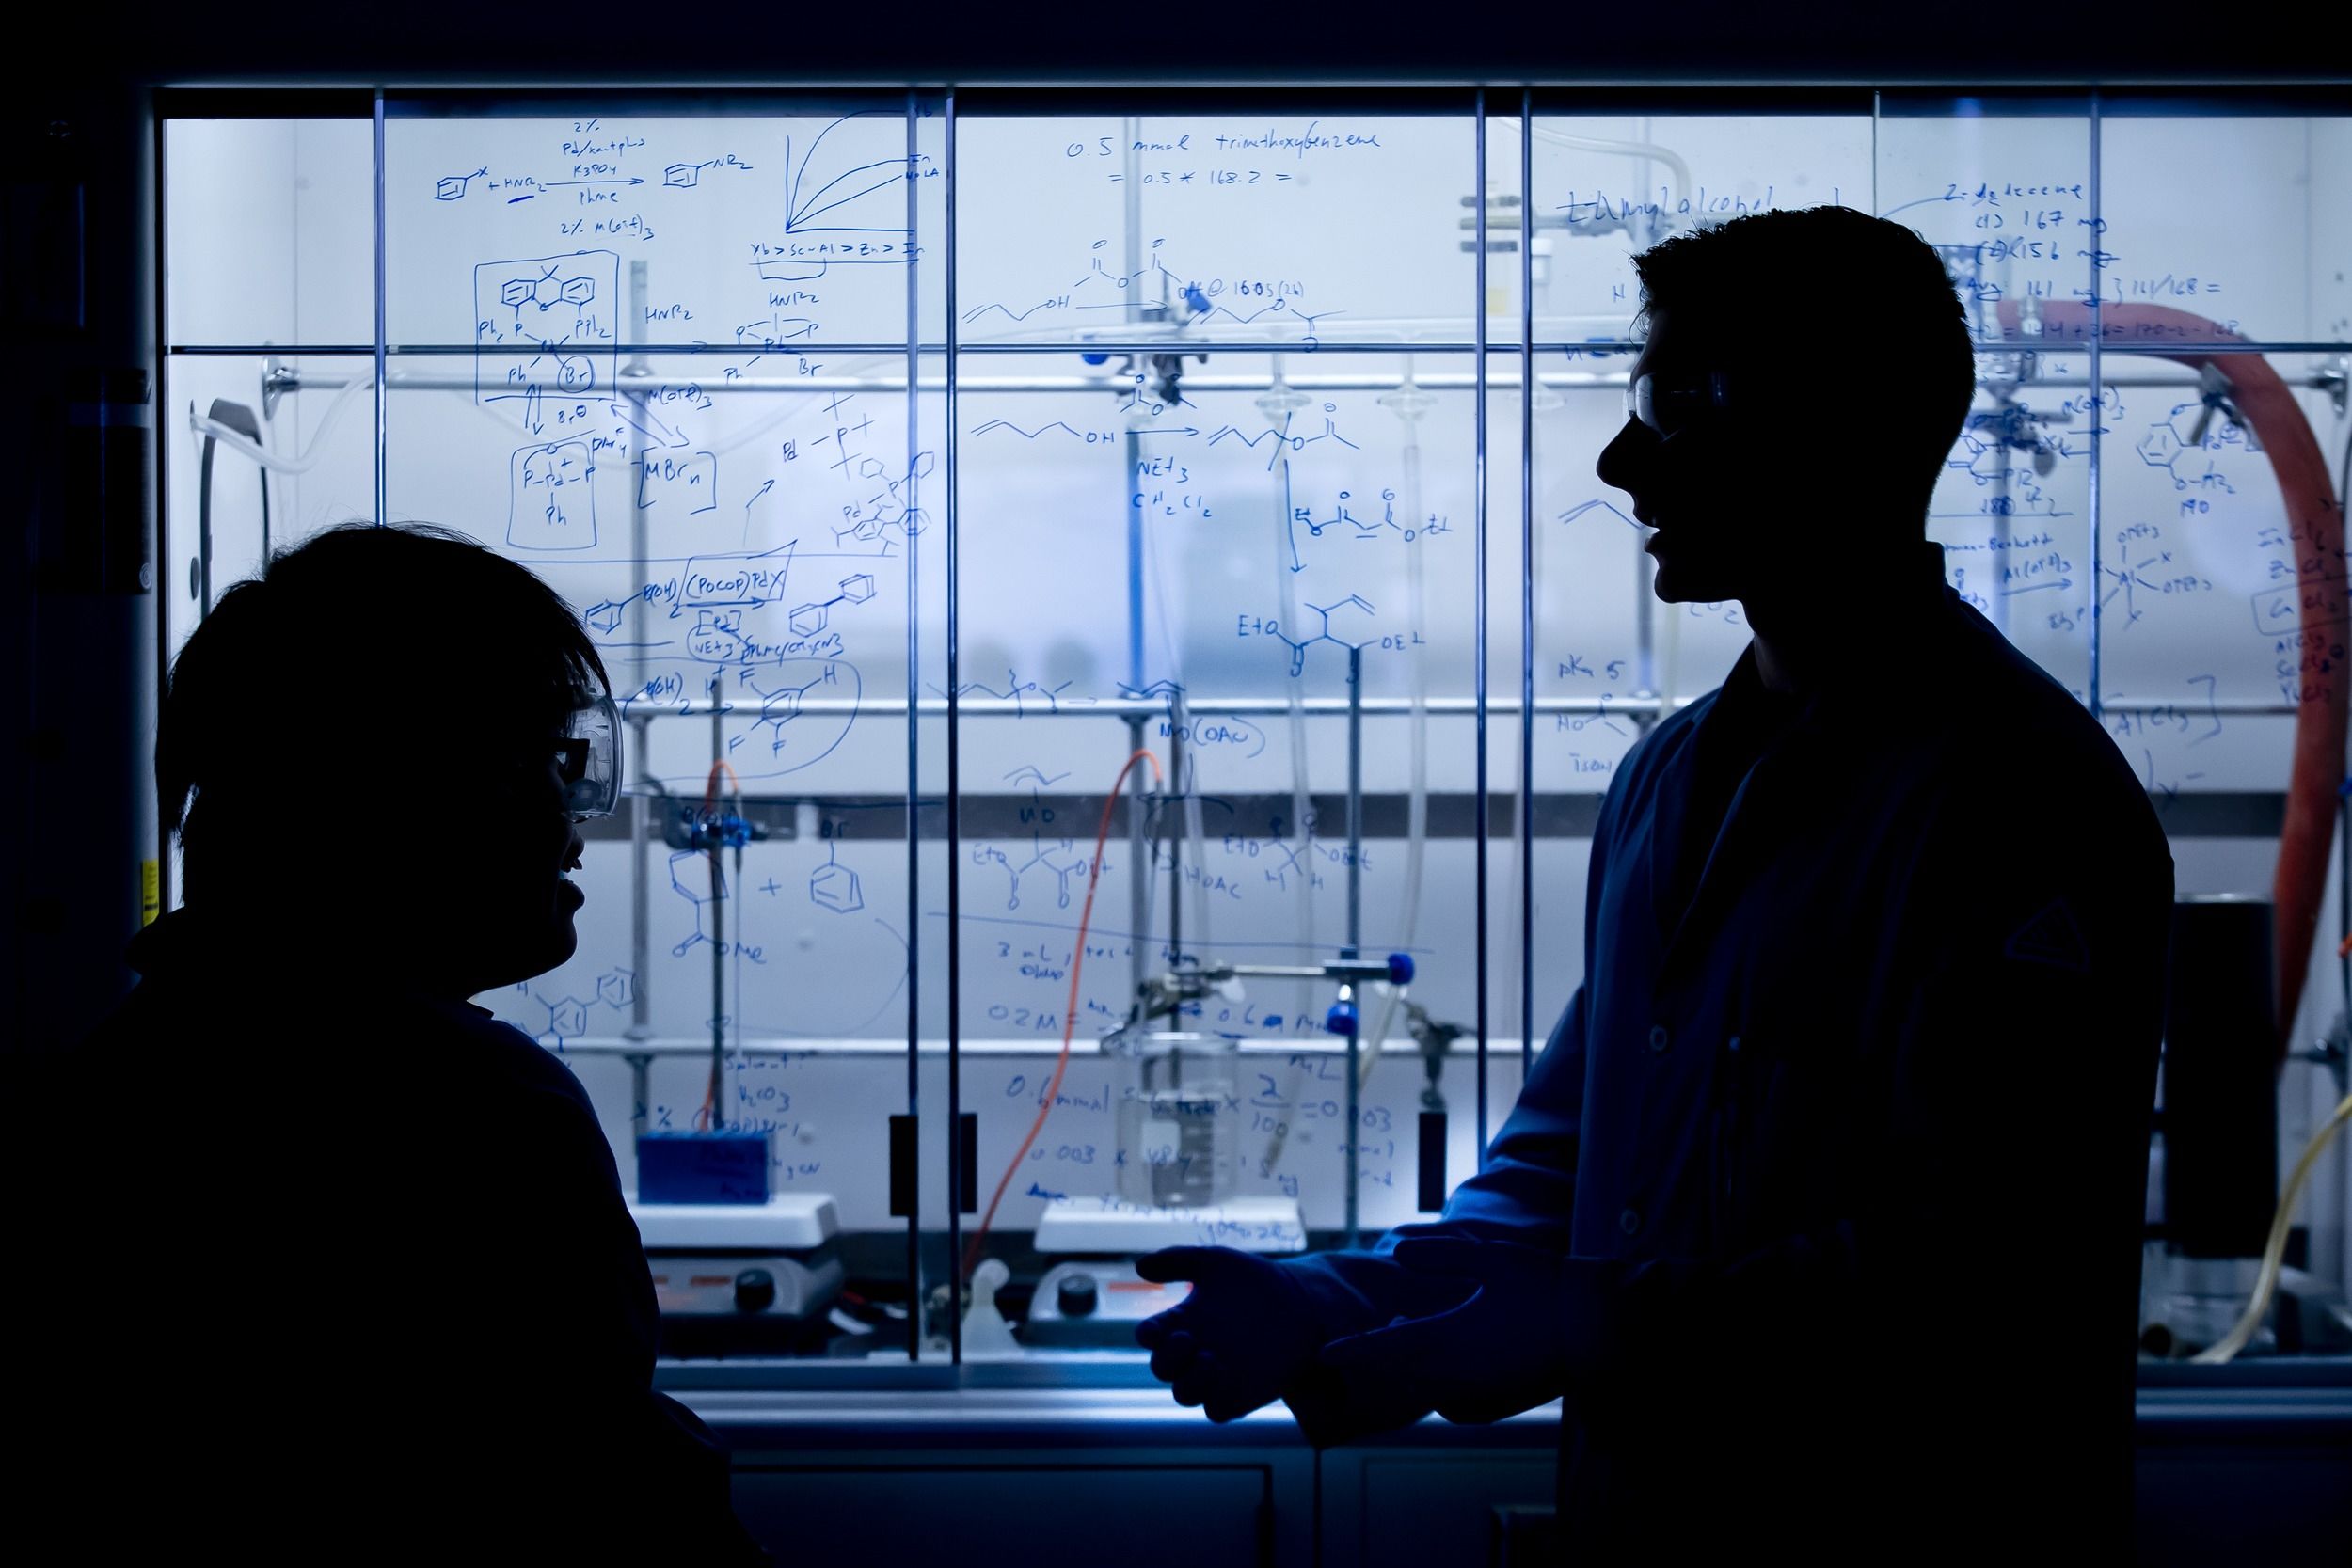 Silhouettes of students in a computer lab